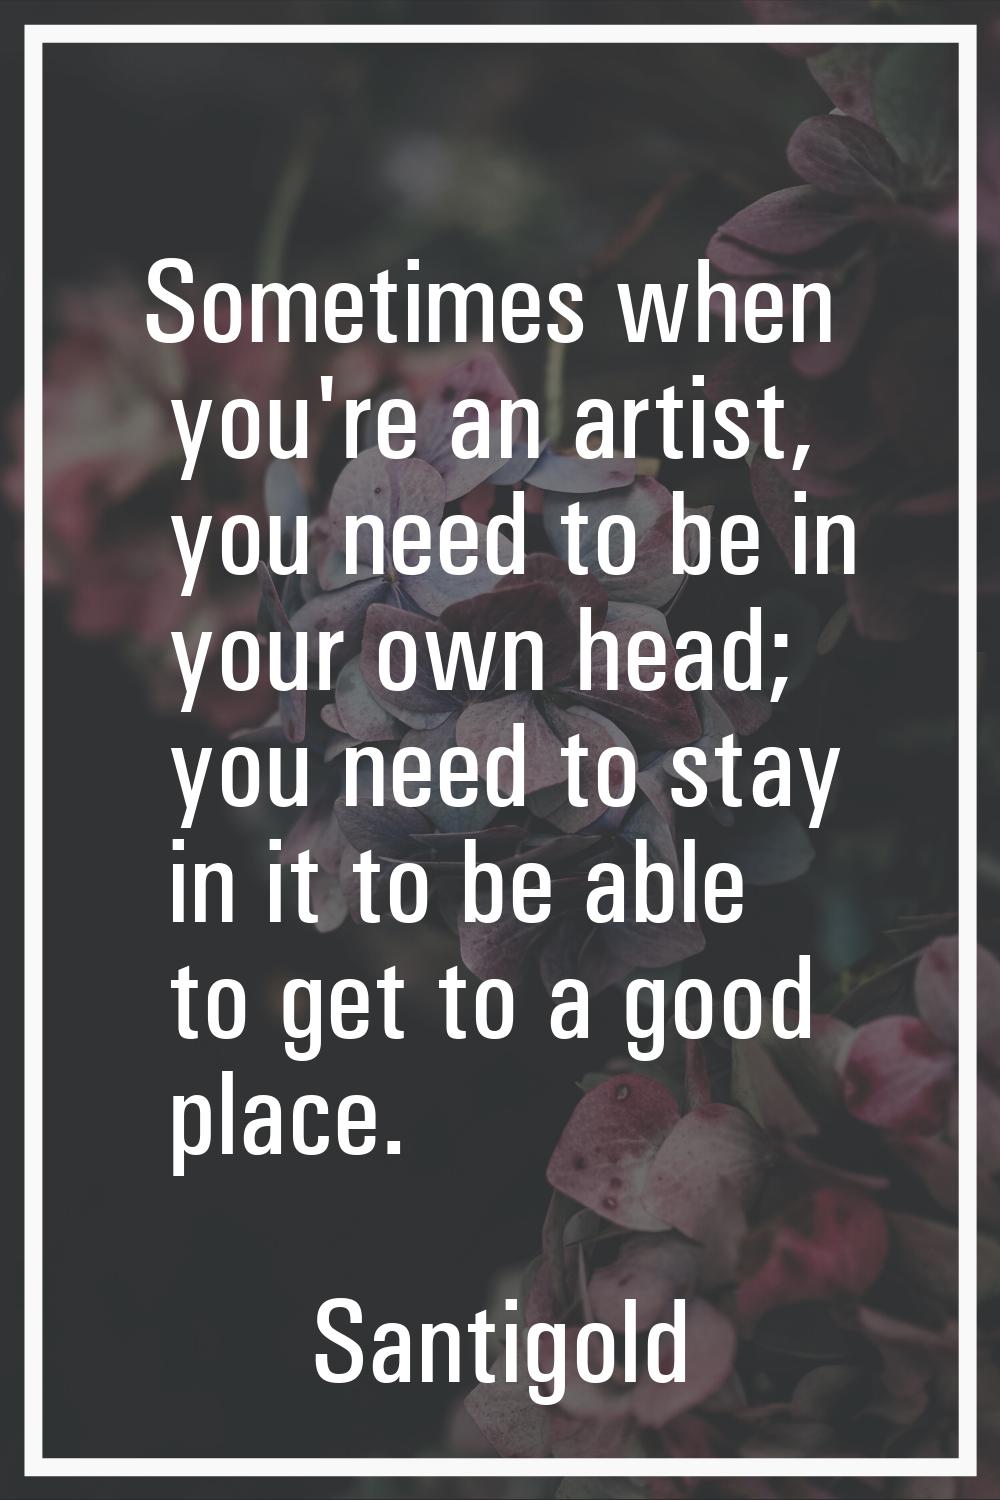 Sometimes when you're an artist, you need to be in your own head; you need to stay in it to be able